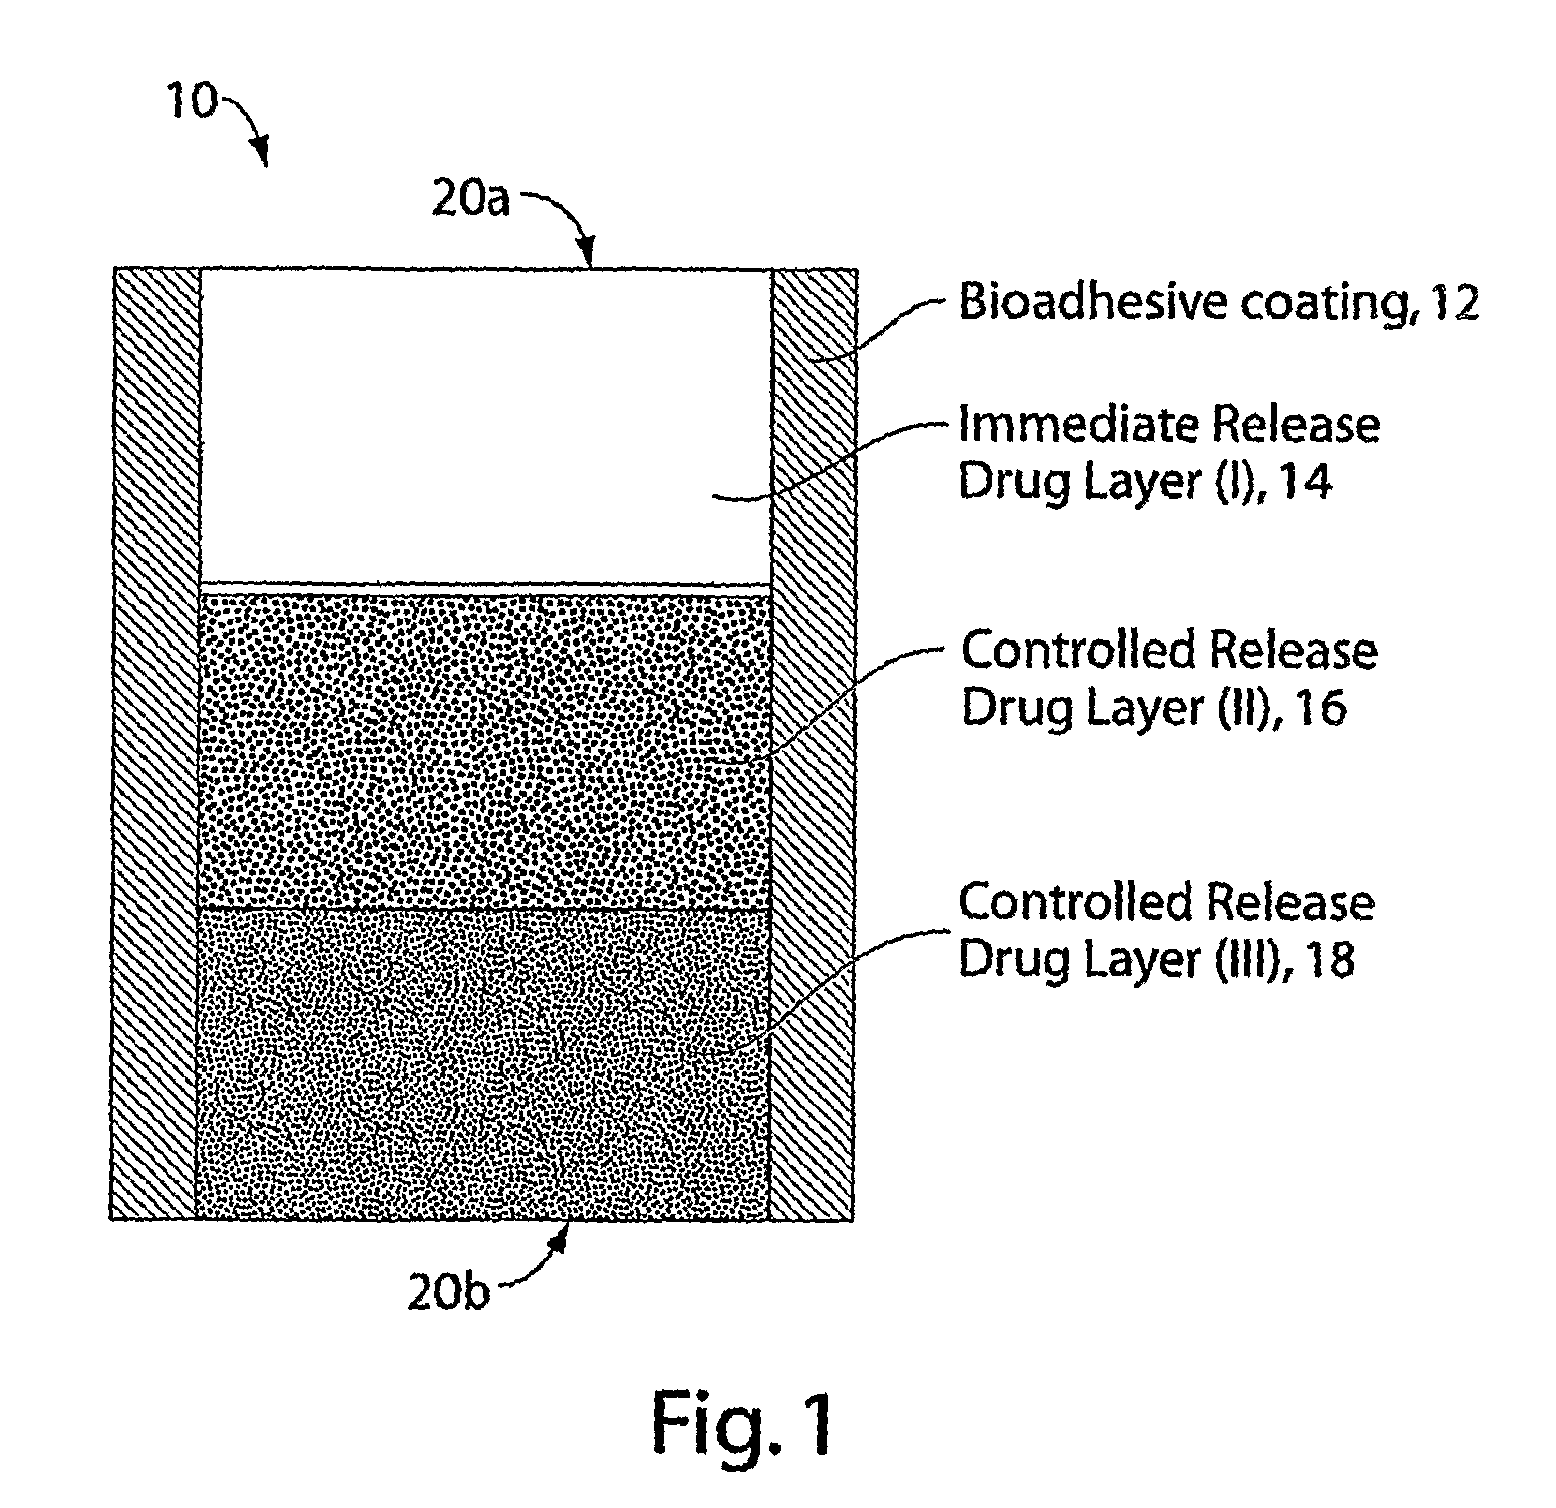 Multi-Layer Tablets and Bioadhesive Dosage Forms